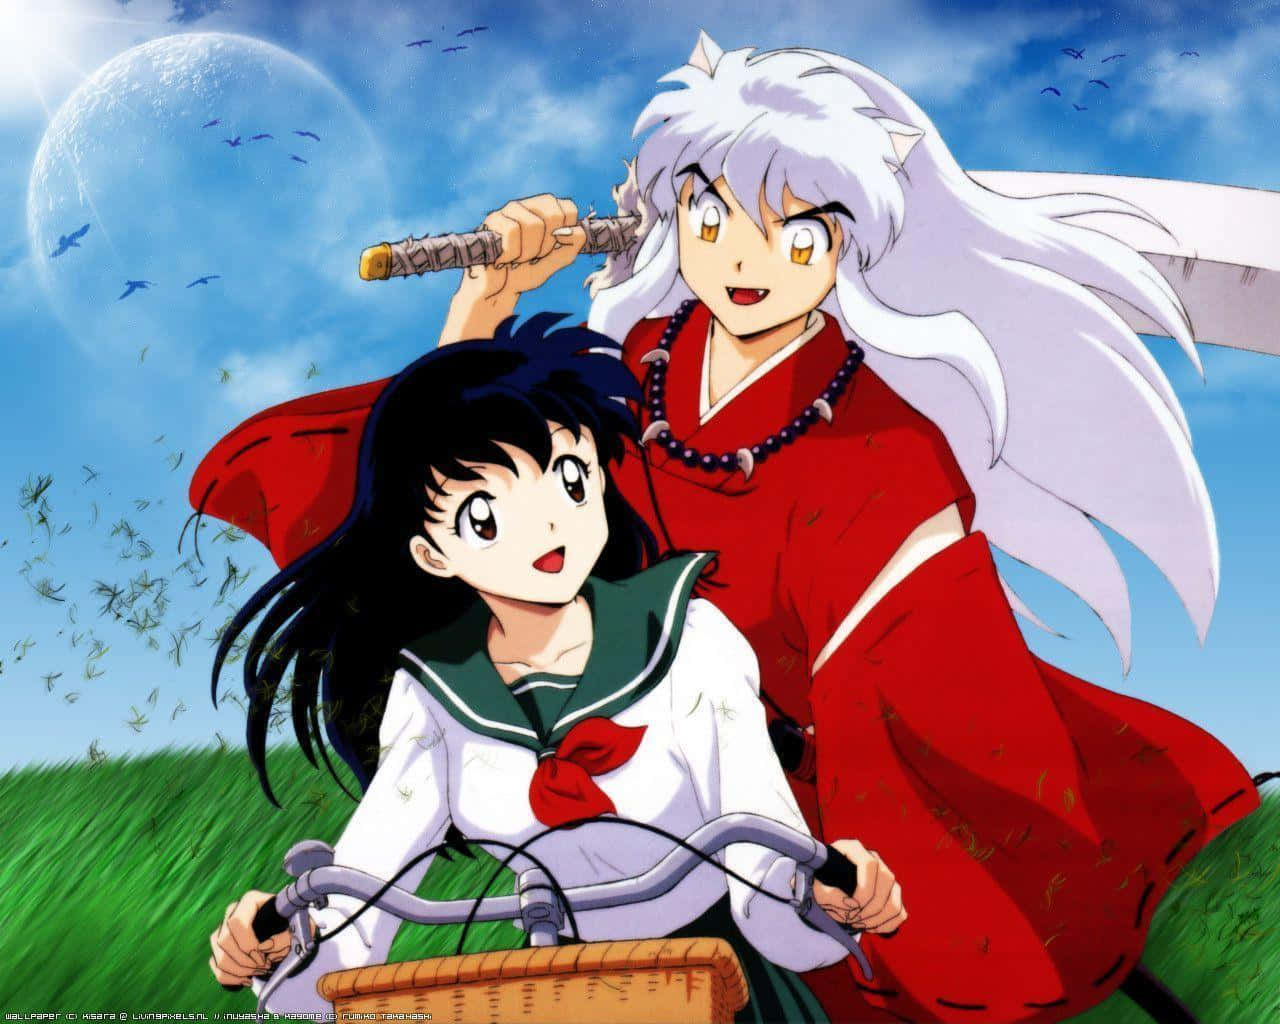 Inuyasha and Kagome, the Star-Crossed Lovers